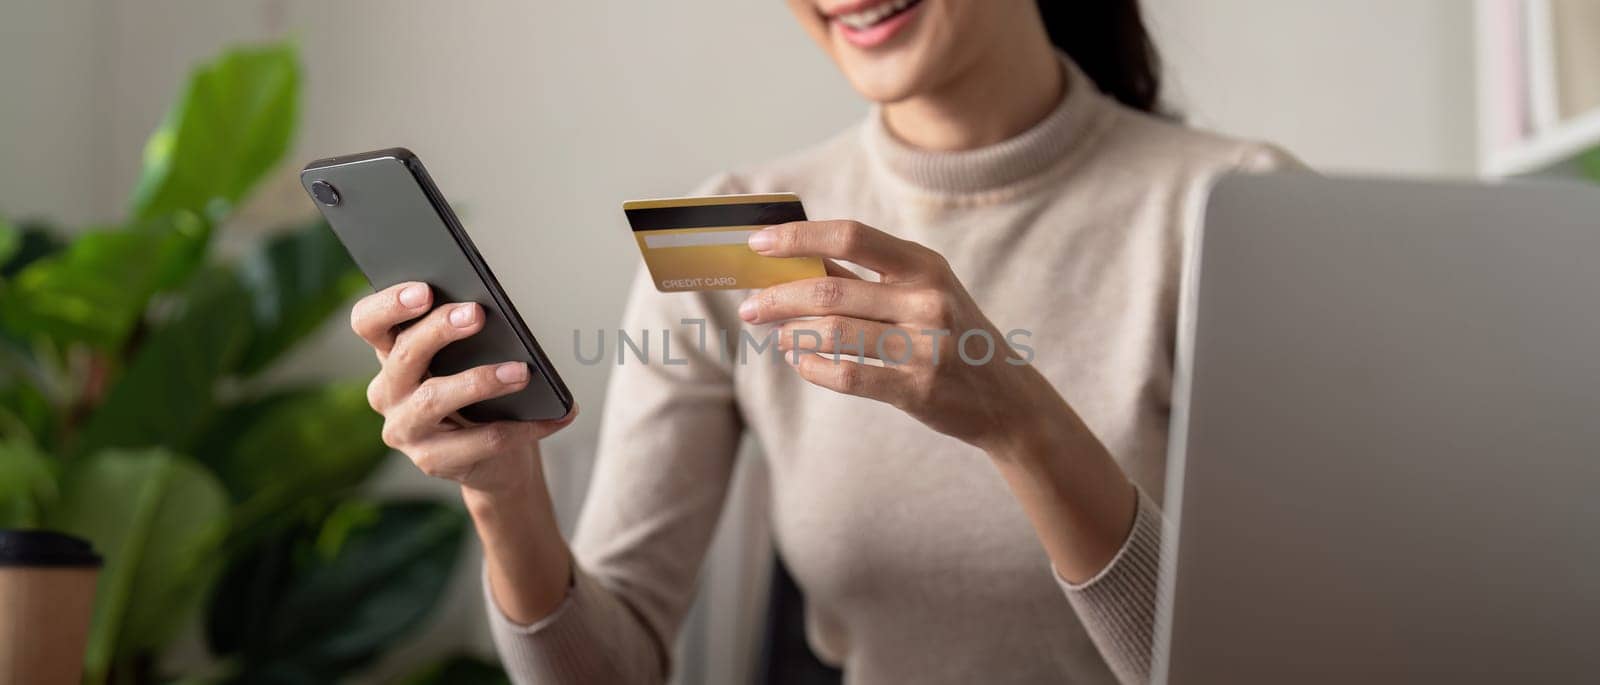 Asian female holding smartphone and credit card, using mobile banking app or online shopping app.